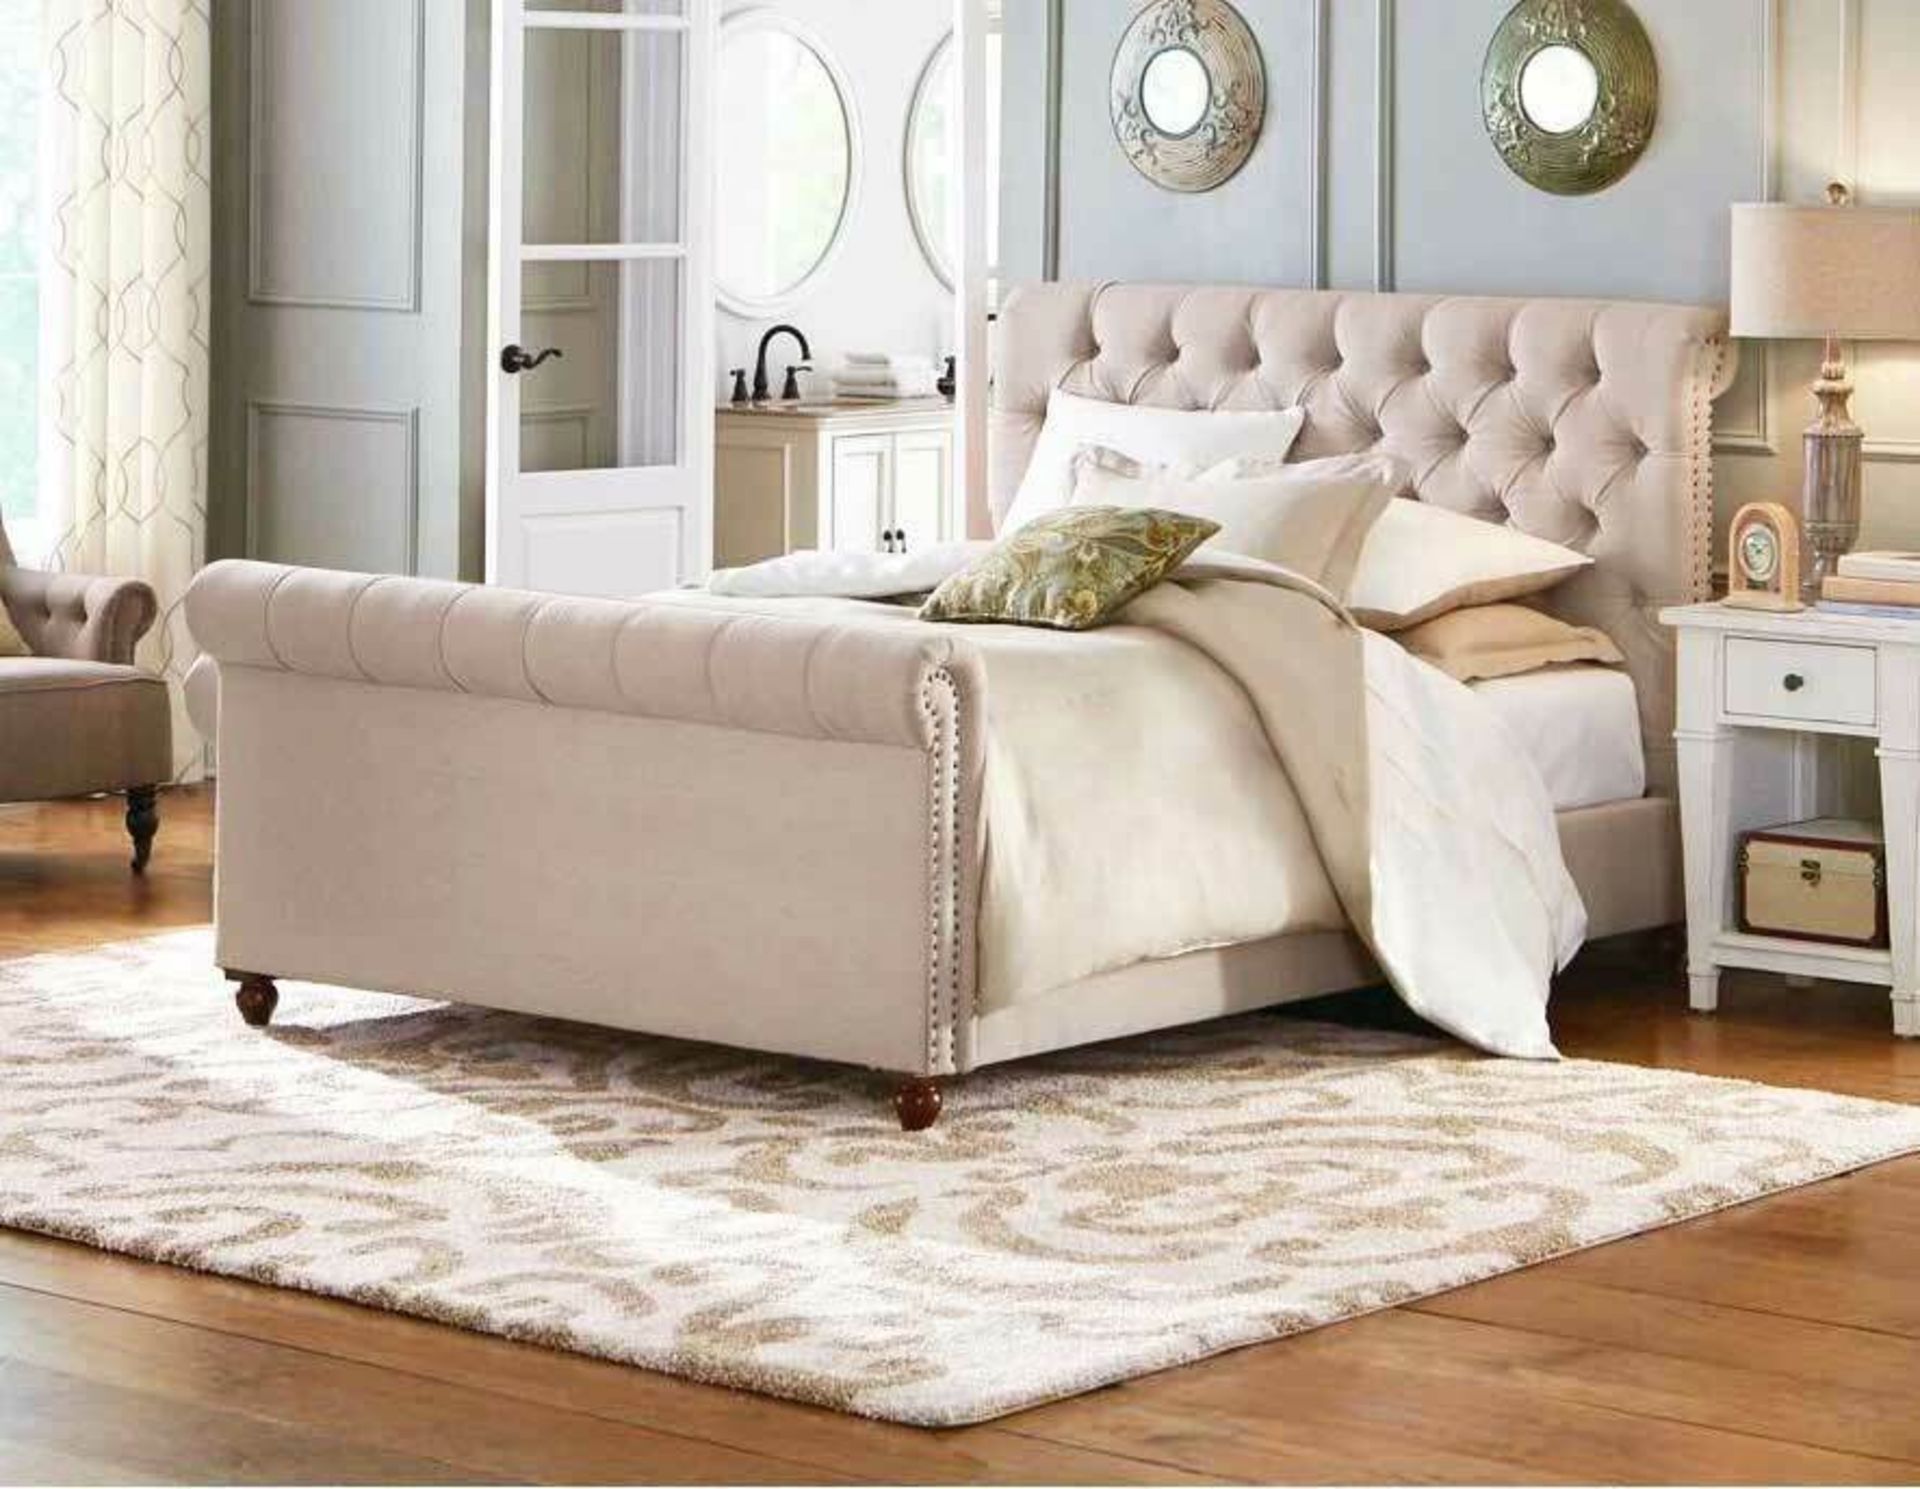 Duchess King Size Sleigh Bed Champagne Velvet A truly glamourous sleigh bed. This bed frame is fully - Image 2 of 2